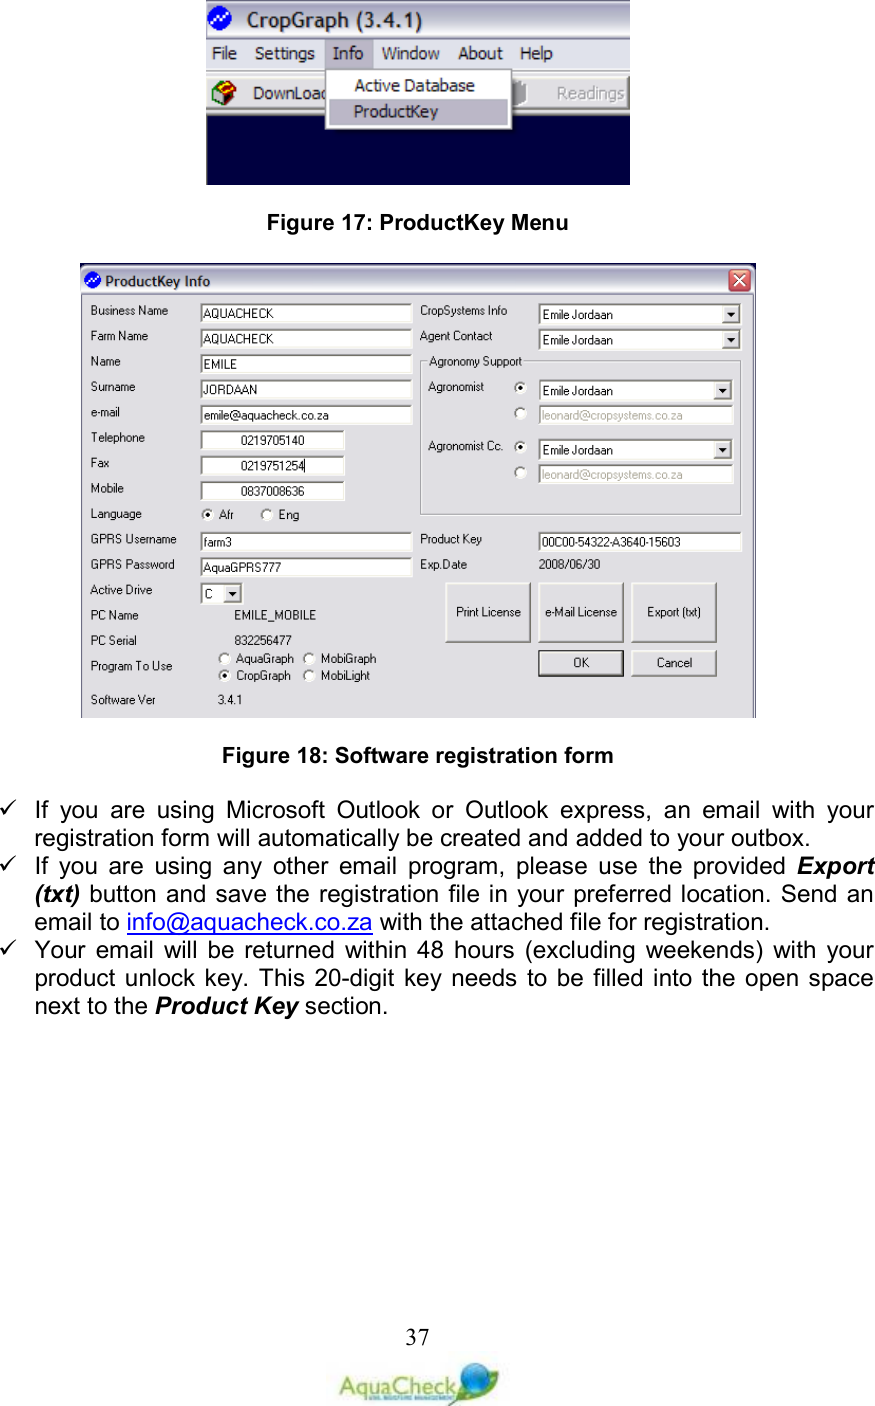   37   Figure 17: ProductKey Menu     Figure 18: Software registration form    If  you  are  using  Microsoft  Outlook  or  Outlook  express,  an  email  with  your registration form will automatically be created and added to your outbox.   If  you  are  using  any  other  email  program,  please  use  the  provided  Export (txt) button and save the registration file in your preferred location. Send an email to info@aquacheck.co.za with the attached file for registration.   Your  email  will  be  returned  within  48  hours  (excluding  weekends)  with  your product unlock key.  This 20-digit key needs  to  be filled into the open space next to the Product Key section.  